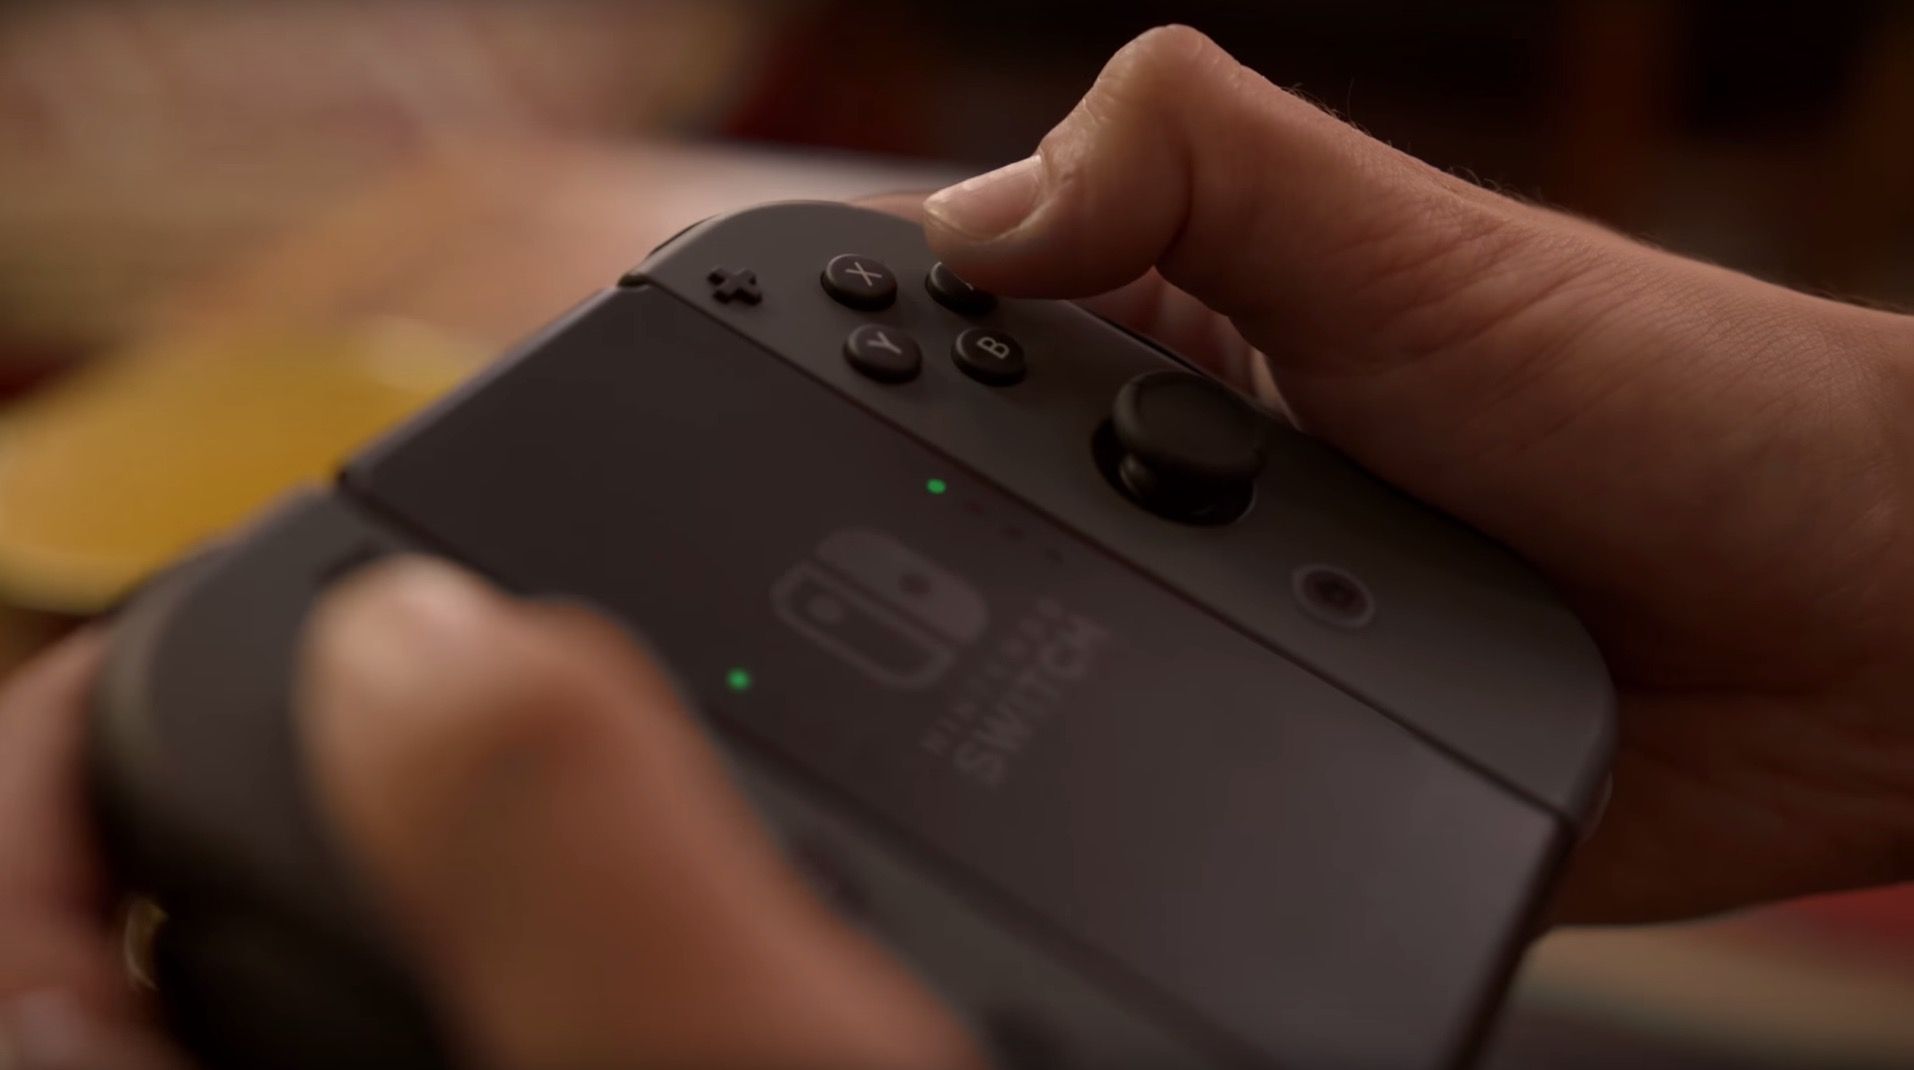 Nintendo Switch buying guide: What to know